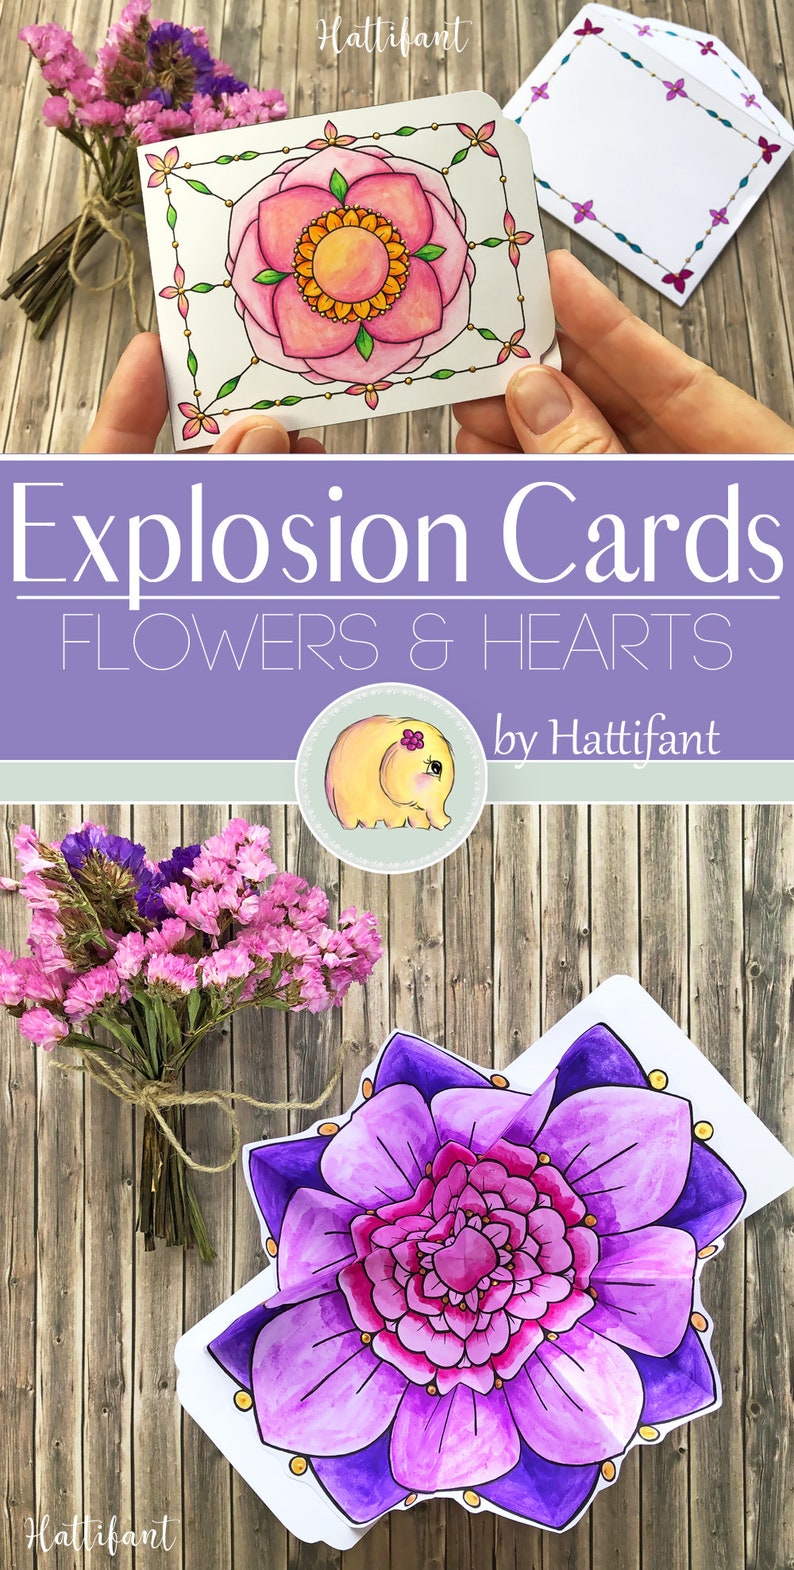 Flowers & Heart Explosion Cards image 5